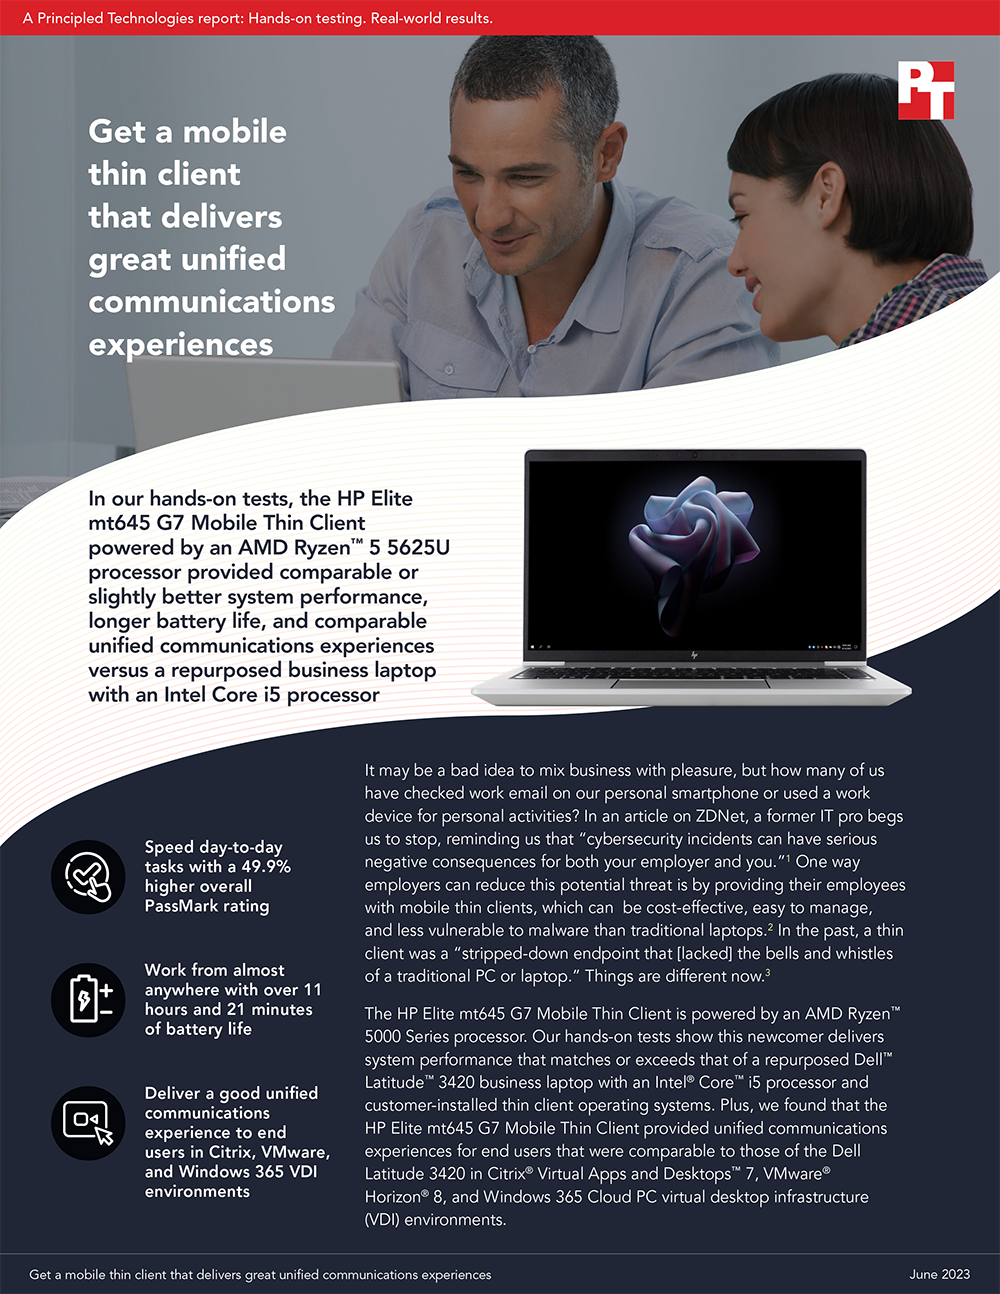  Get a mobile thin client that delivers great unified communications experiences